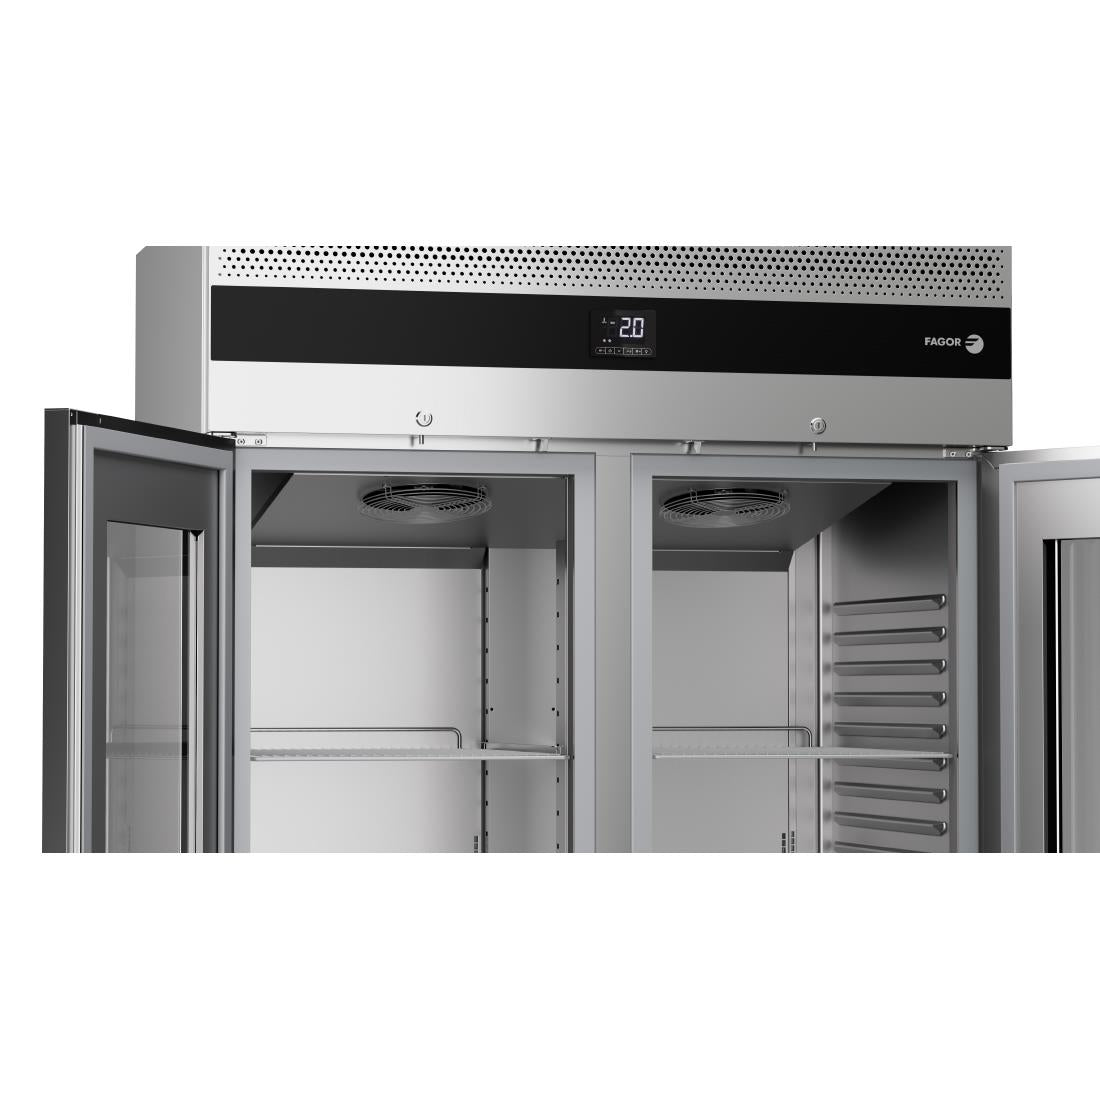 FU006 Fagor Advance Gastronorm Upright Cabinet Display Fridge 2 Door AUP-22G GD JD Catering Equipment Solutions Ltd